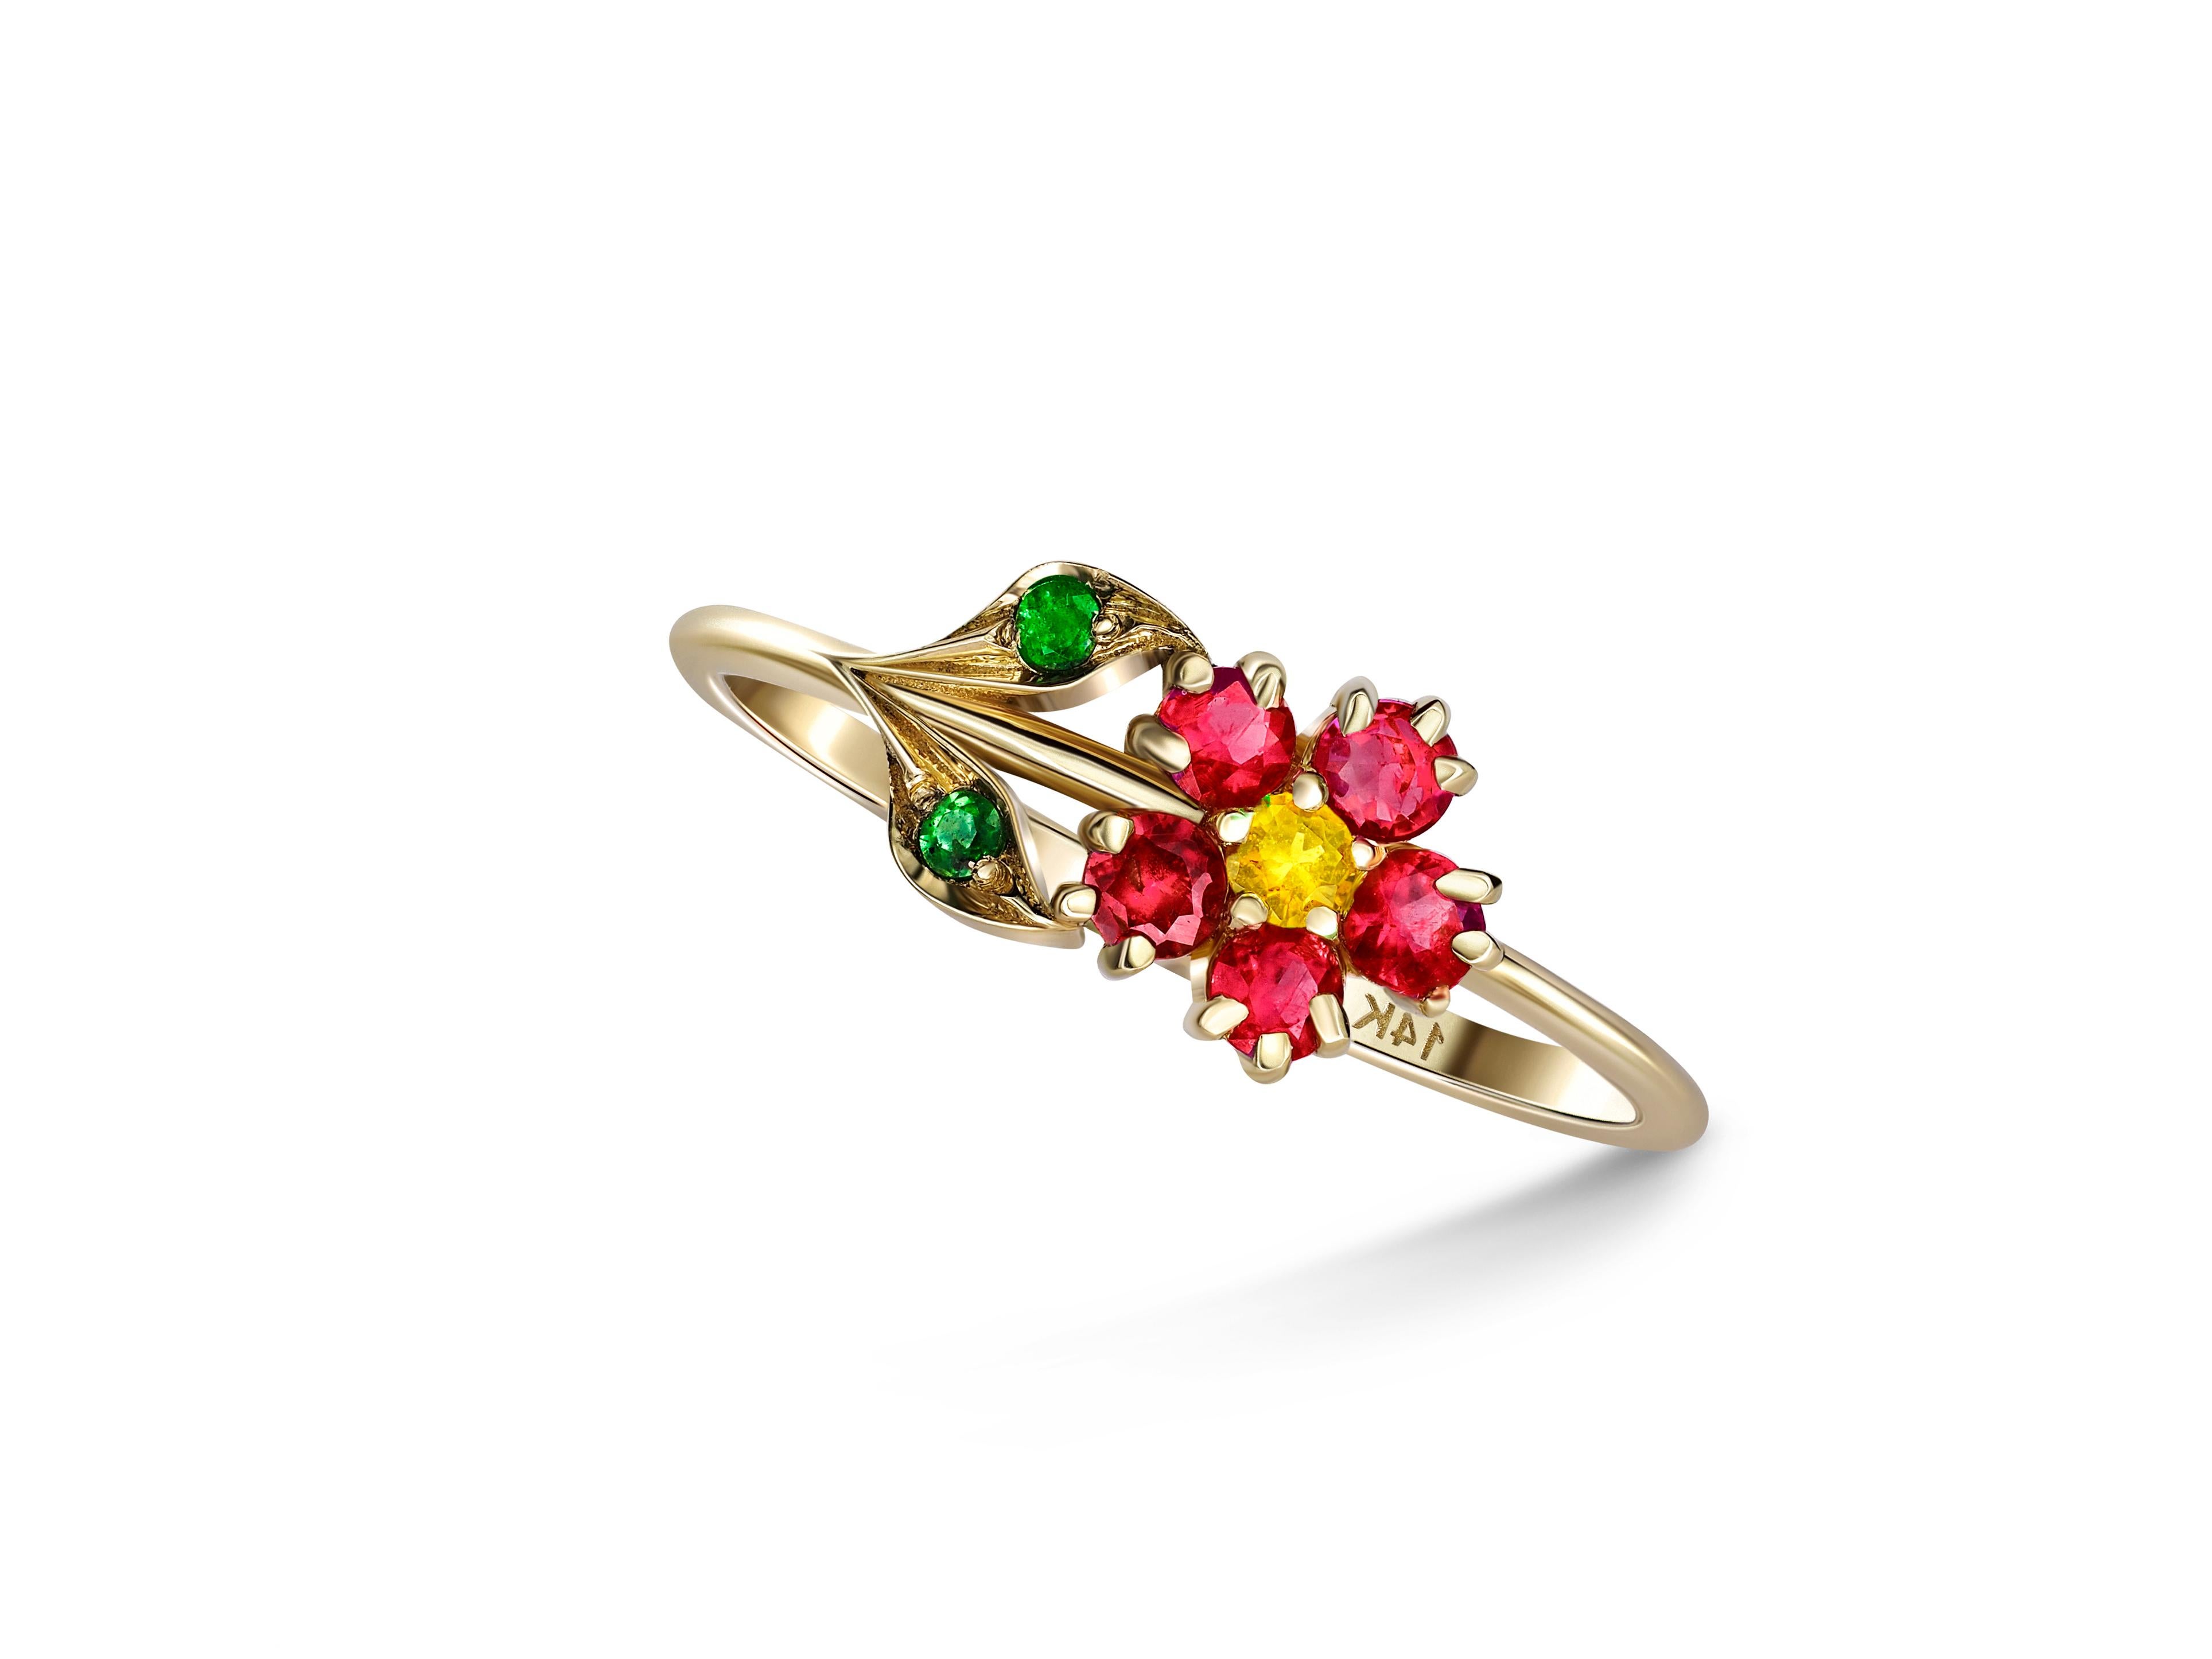 Flower Ring in 14 Karat Gold, Sapphire, Garnet and Chrome Diopsides Ring.  For Sale 2